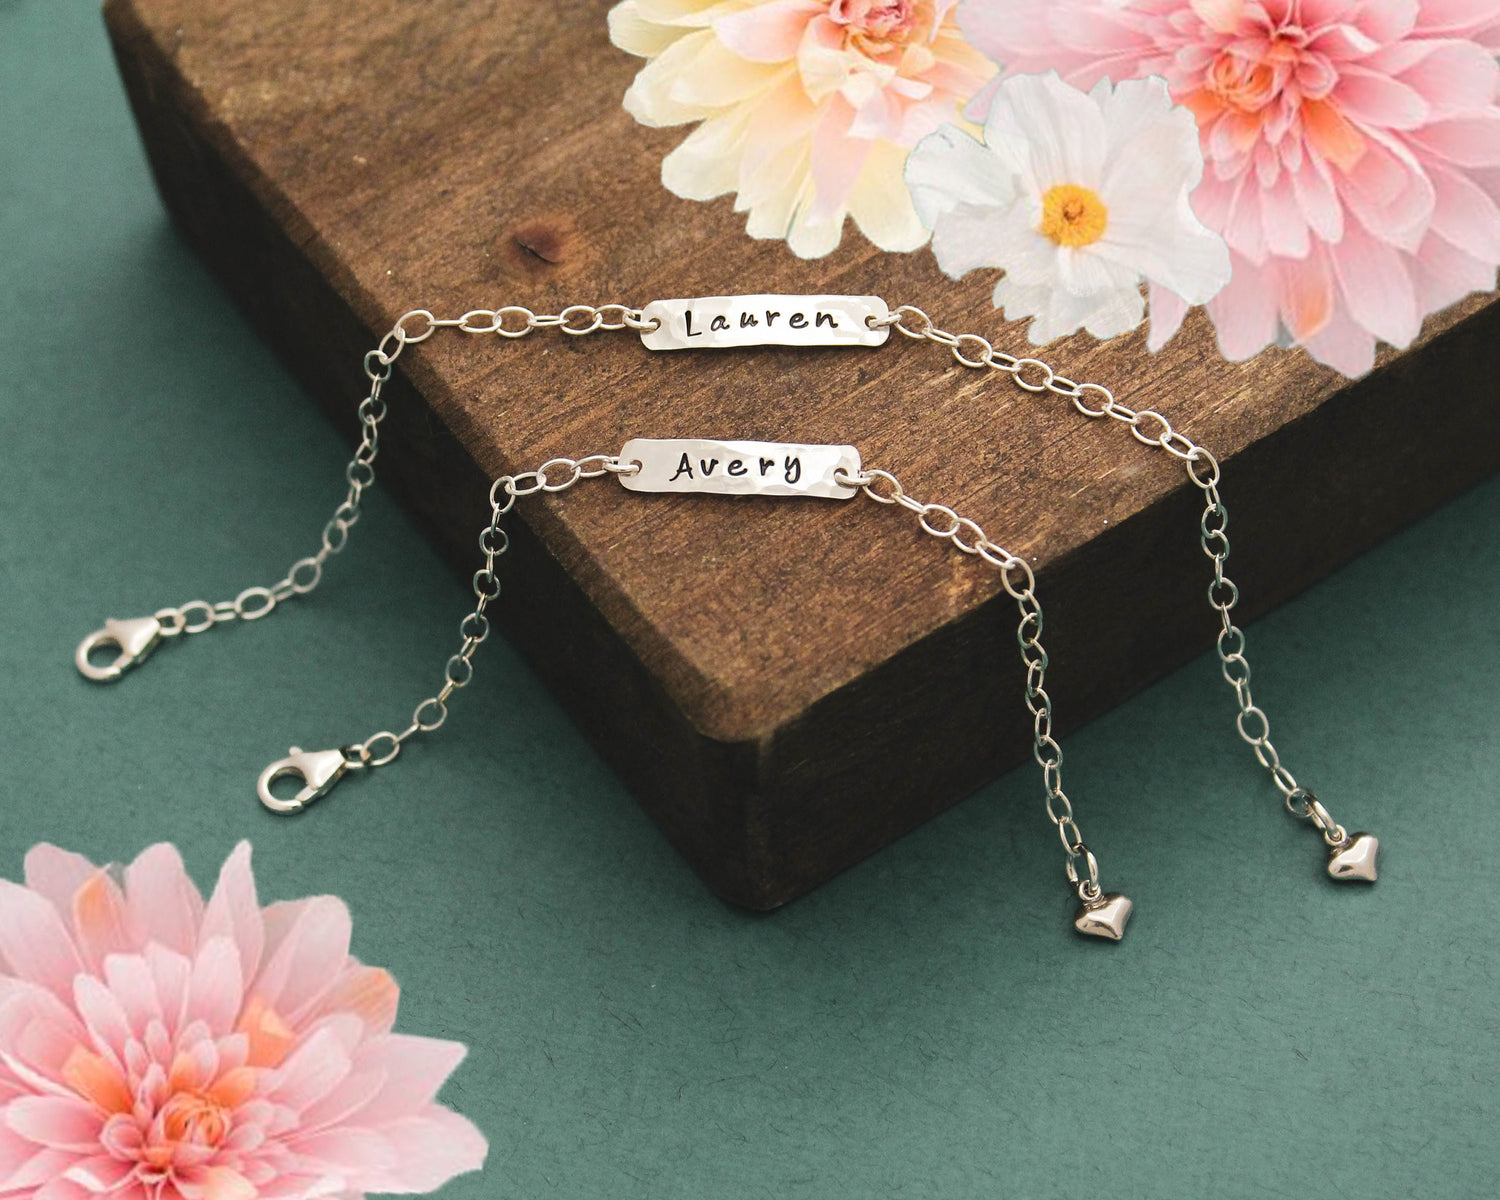 Mother Daughter Bracelet Set Personalized Hand Stamped Names Sterling Silver Jewelry, Mother's Day Gift, Mom + Daughter Gift Set